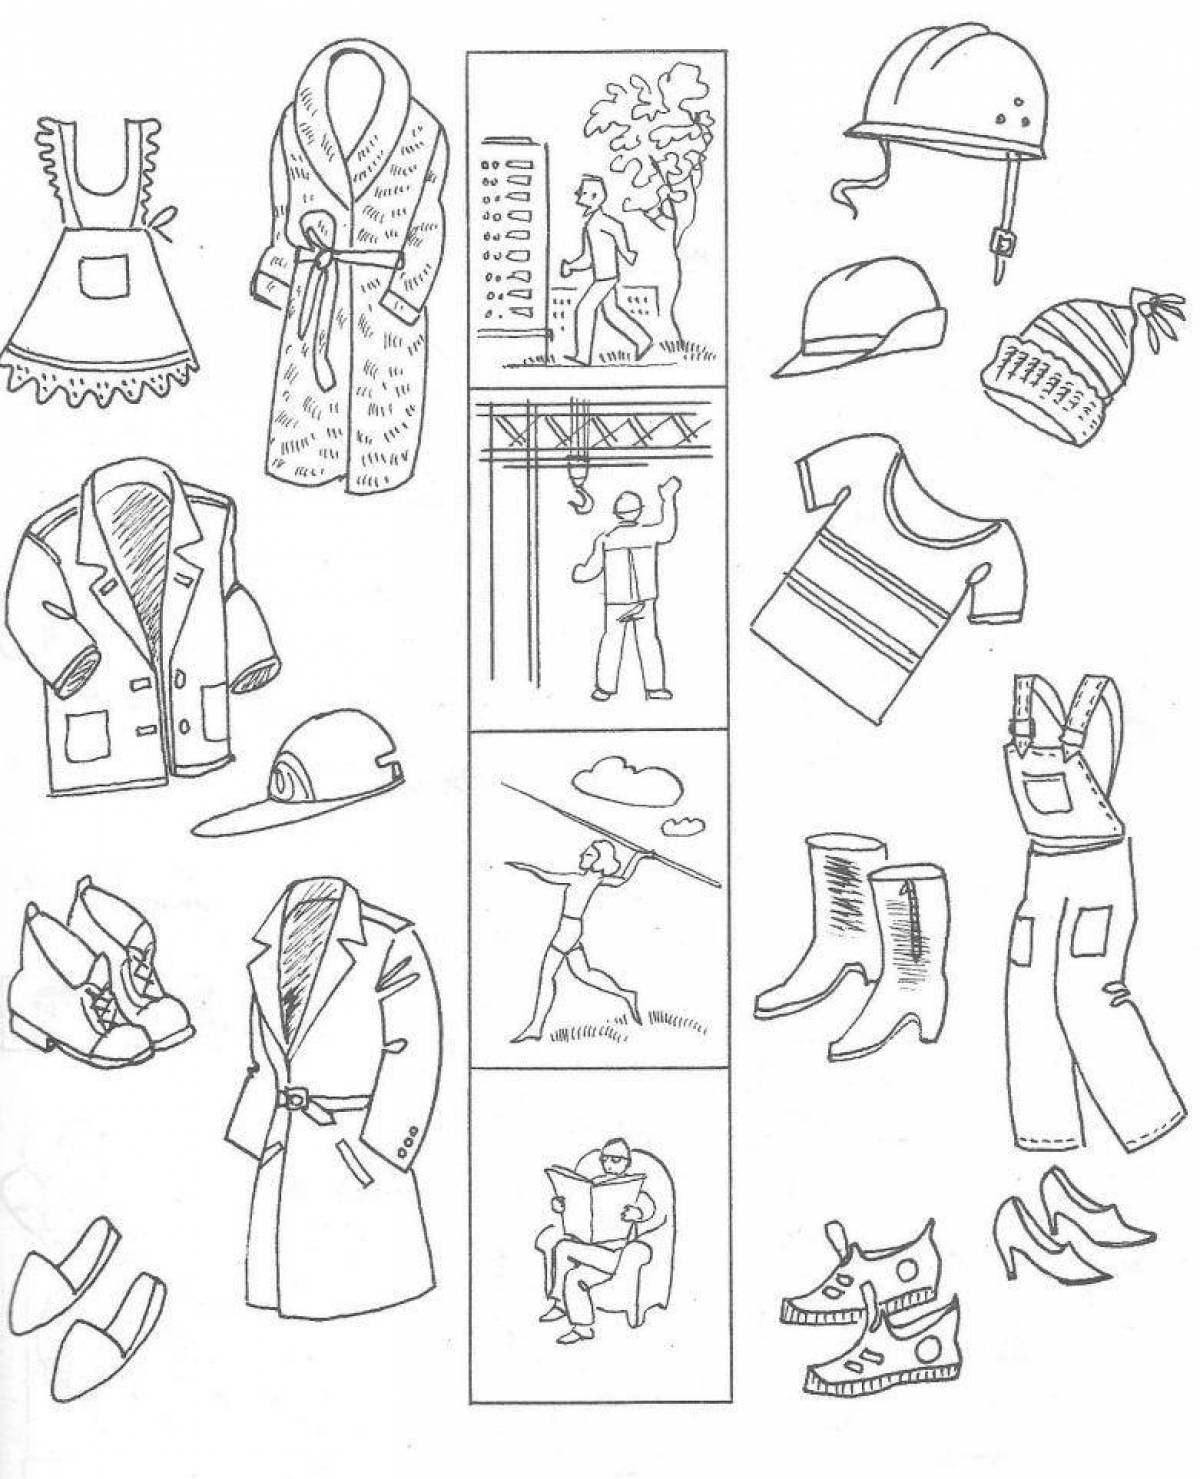 Attractive clothes, shoes, hats, coloring